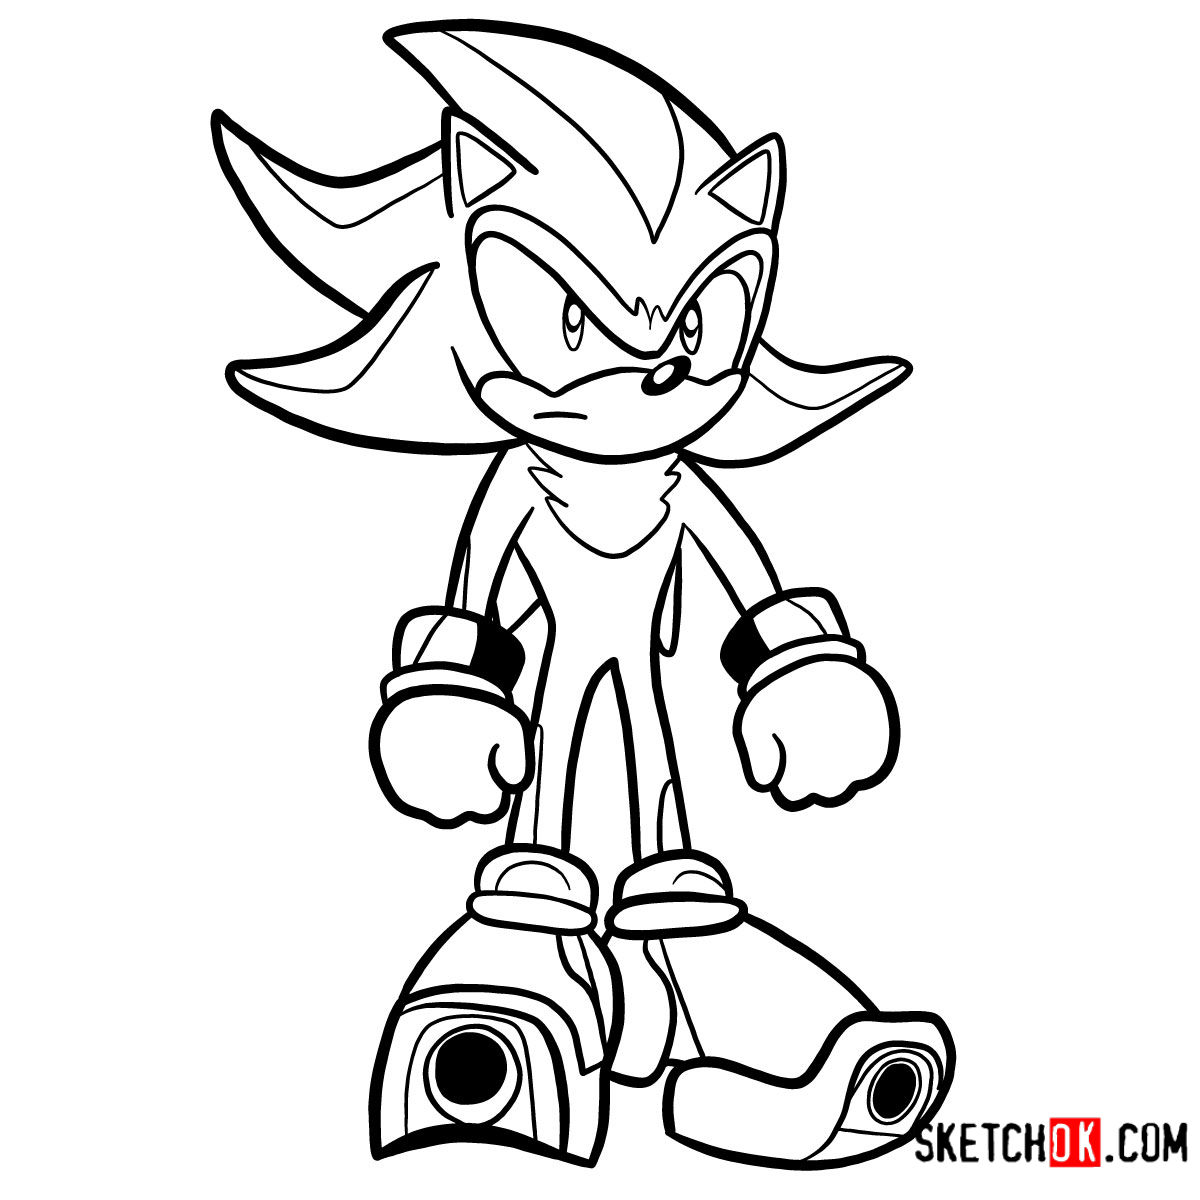 How to draw Shadow the Hedgehog - Sketchok easy drawing guides